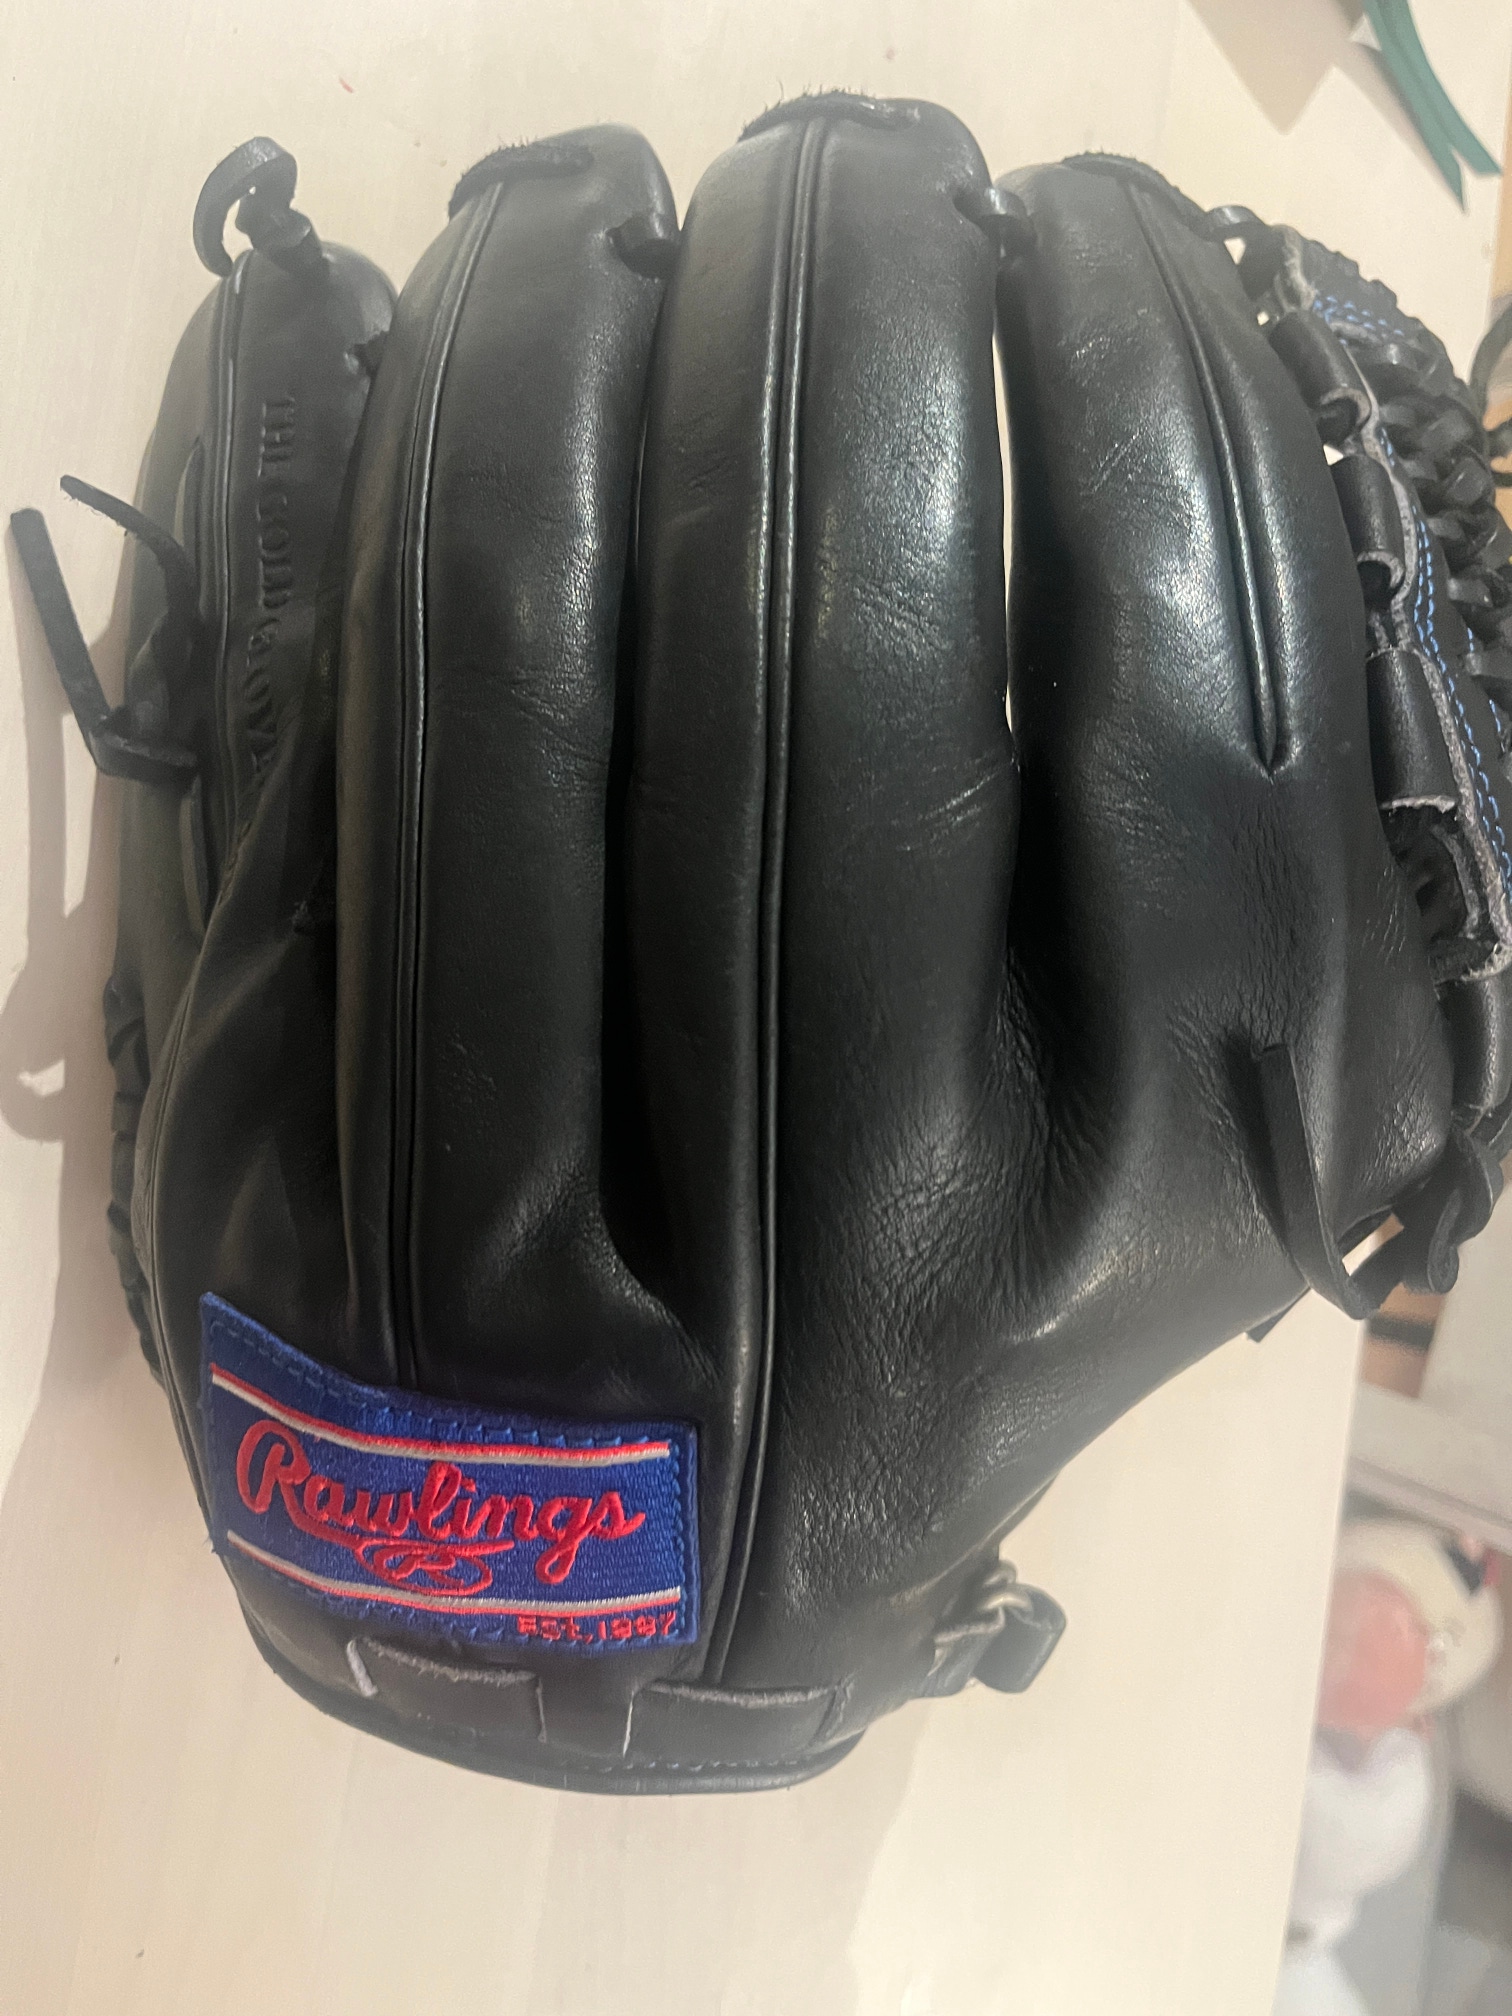 Exclusive Marcus Stroman Model Rawlings Pitcher's Heart of the Hide Baseball Glove 12"